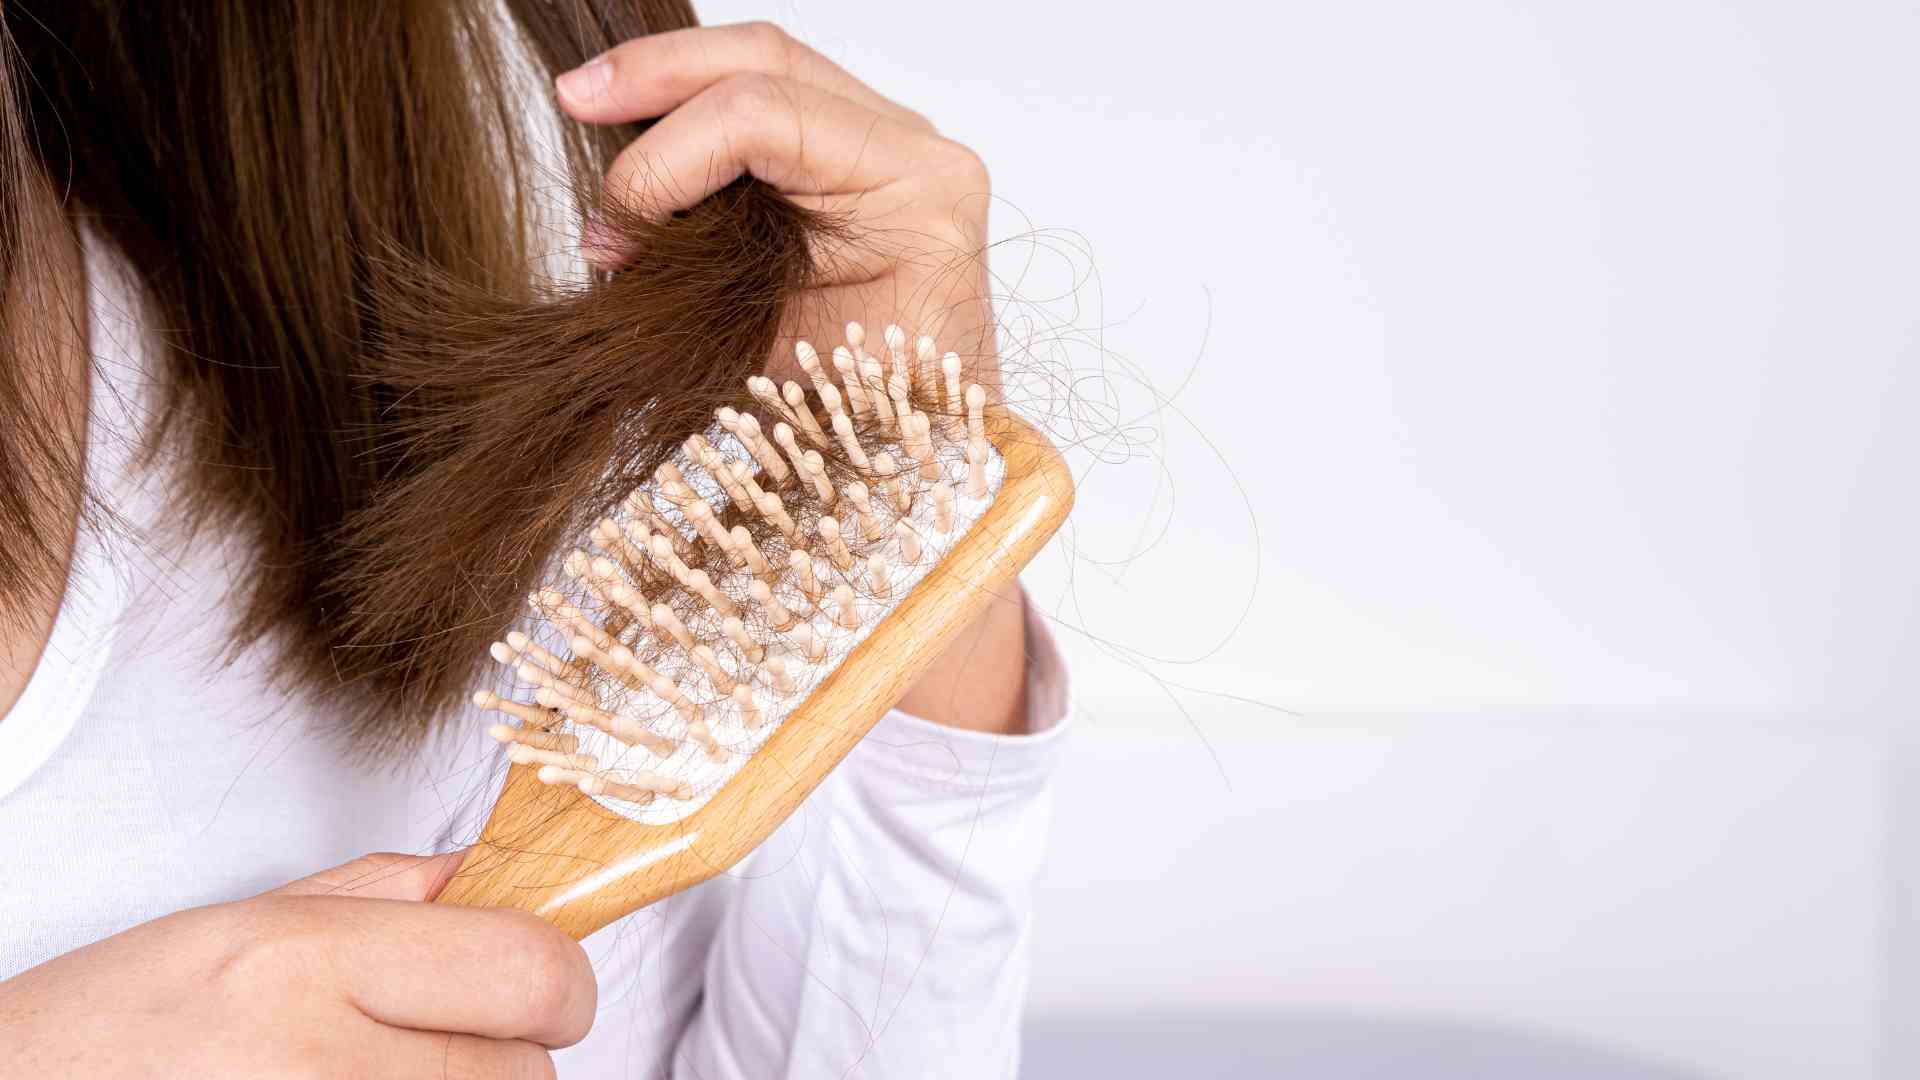 Is there a link between hair loss and thyroid disorders